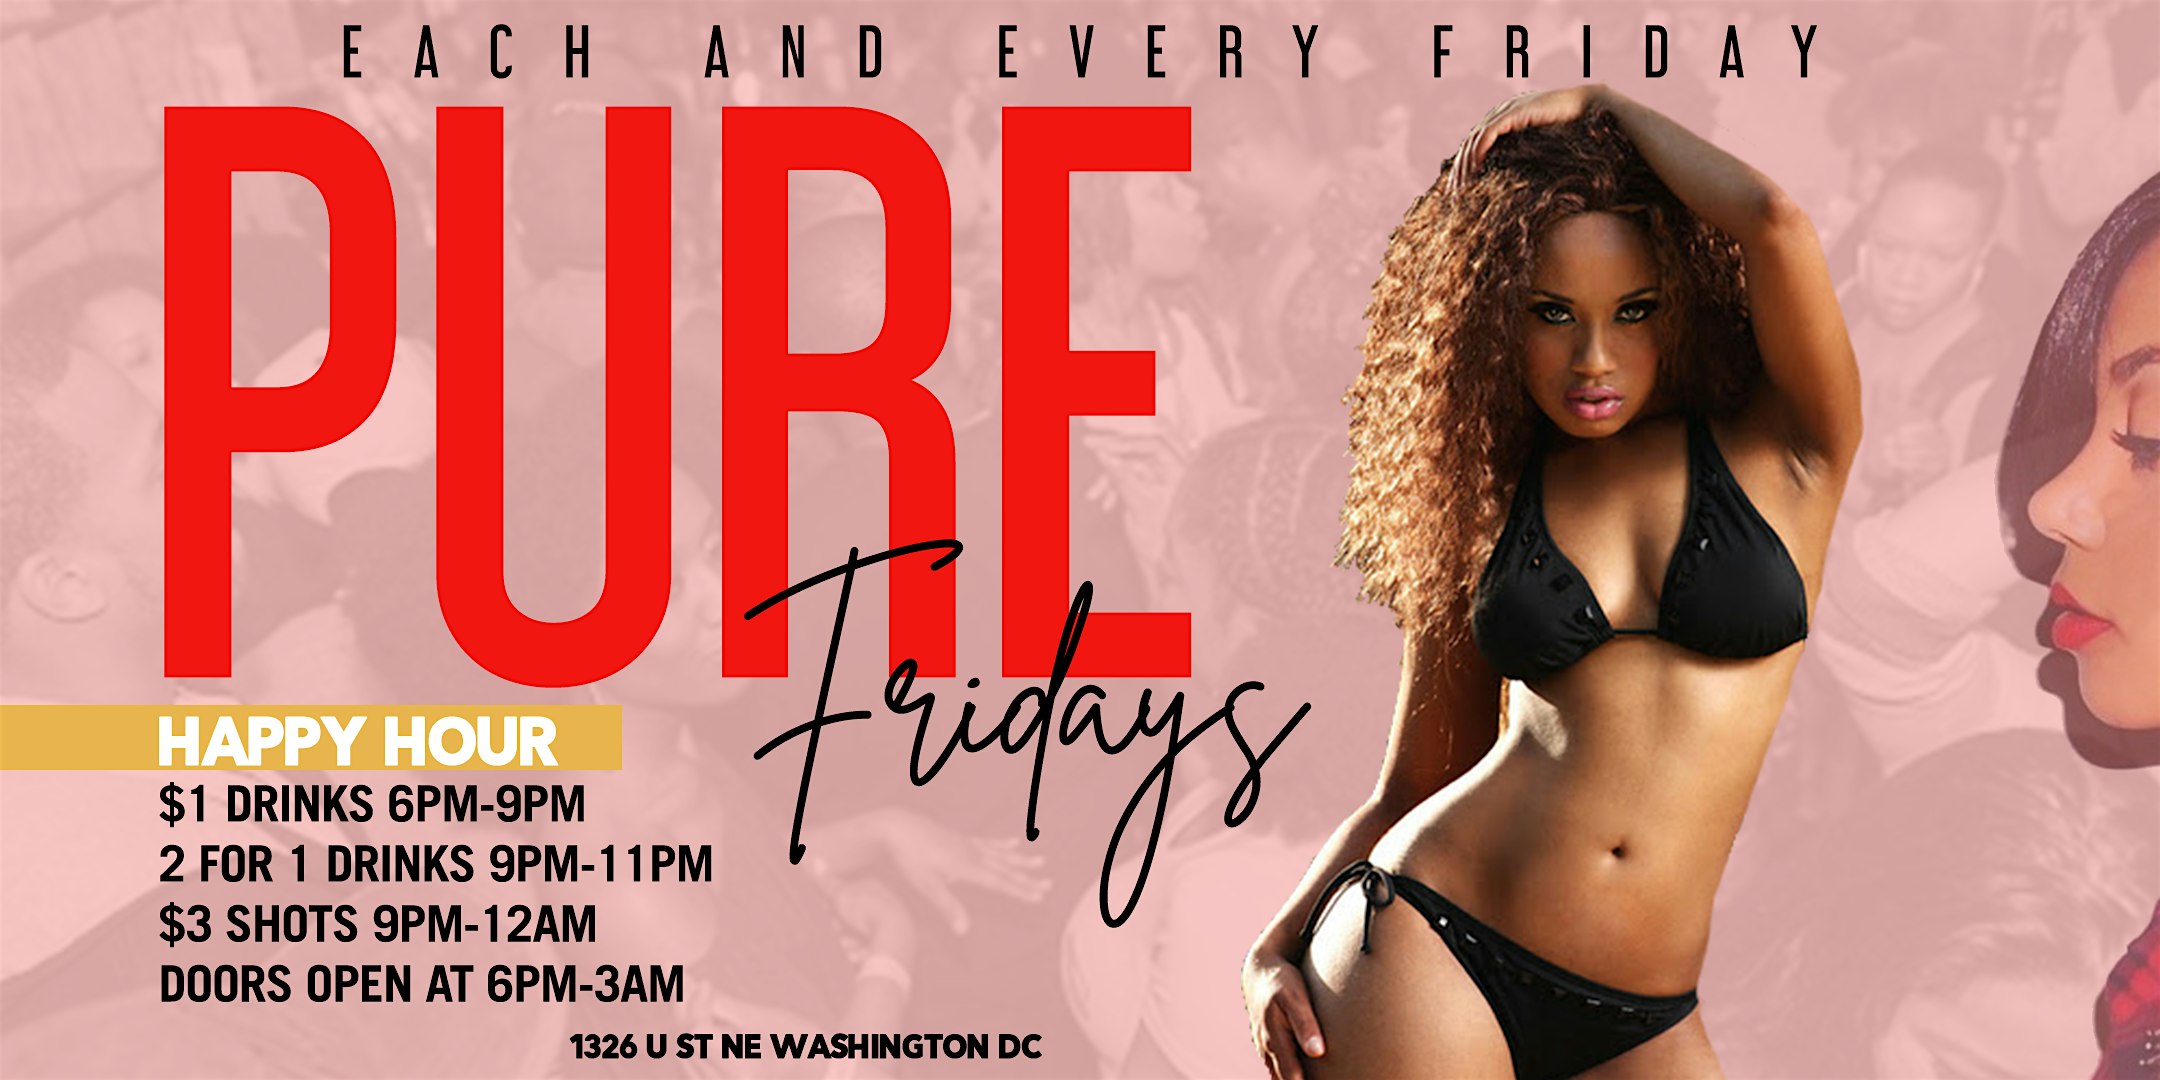 Pure Fridays $1 Drinks 6-9pm 2 for 1 Drinks 9pm - 11pm $3 Shots 9pm - 12am